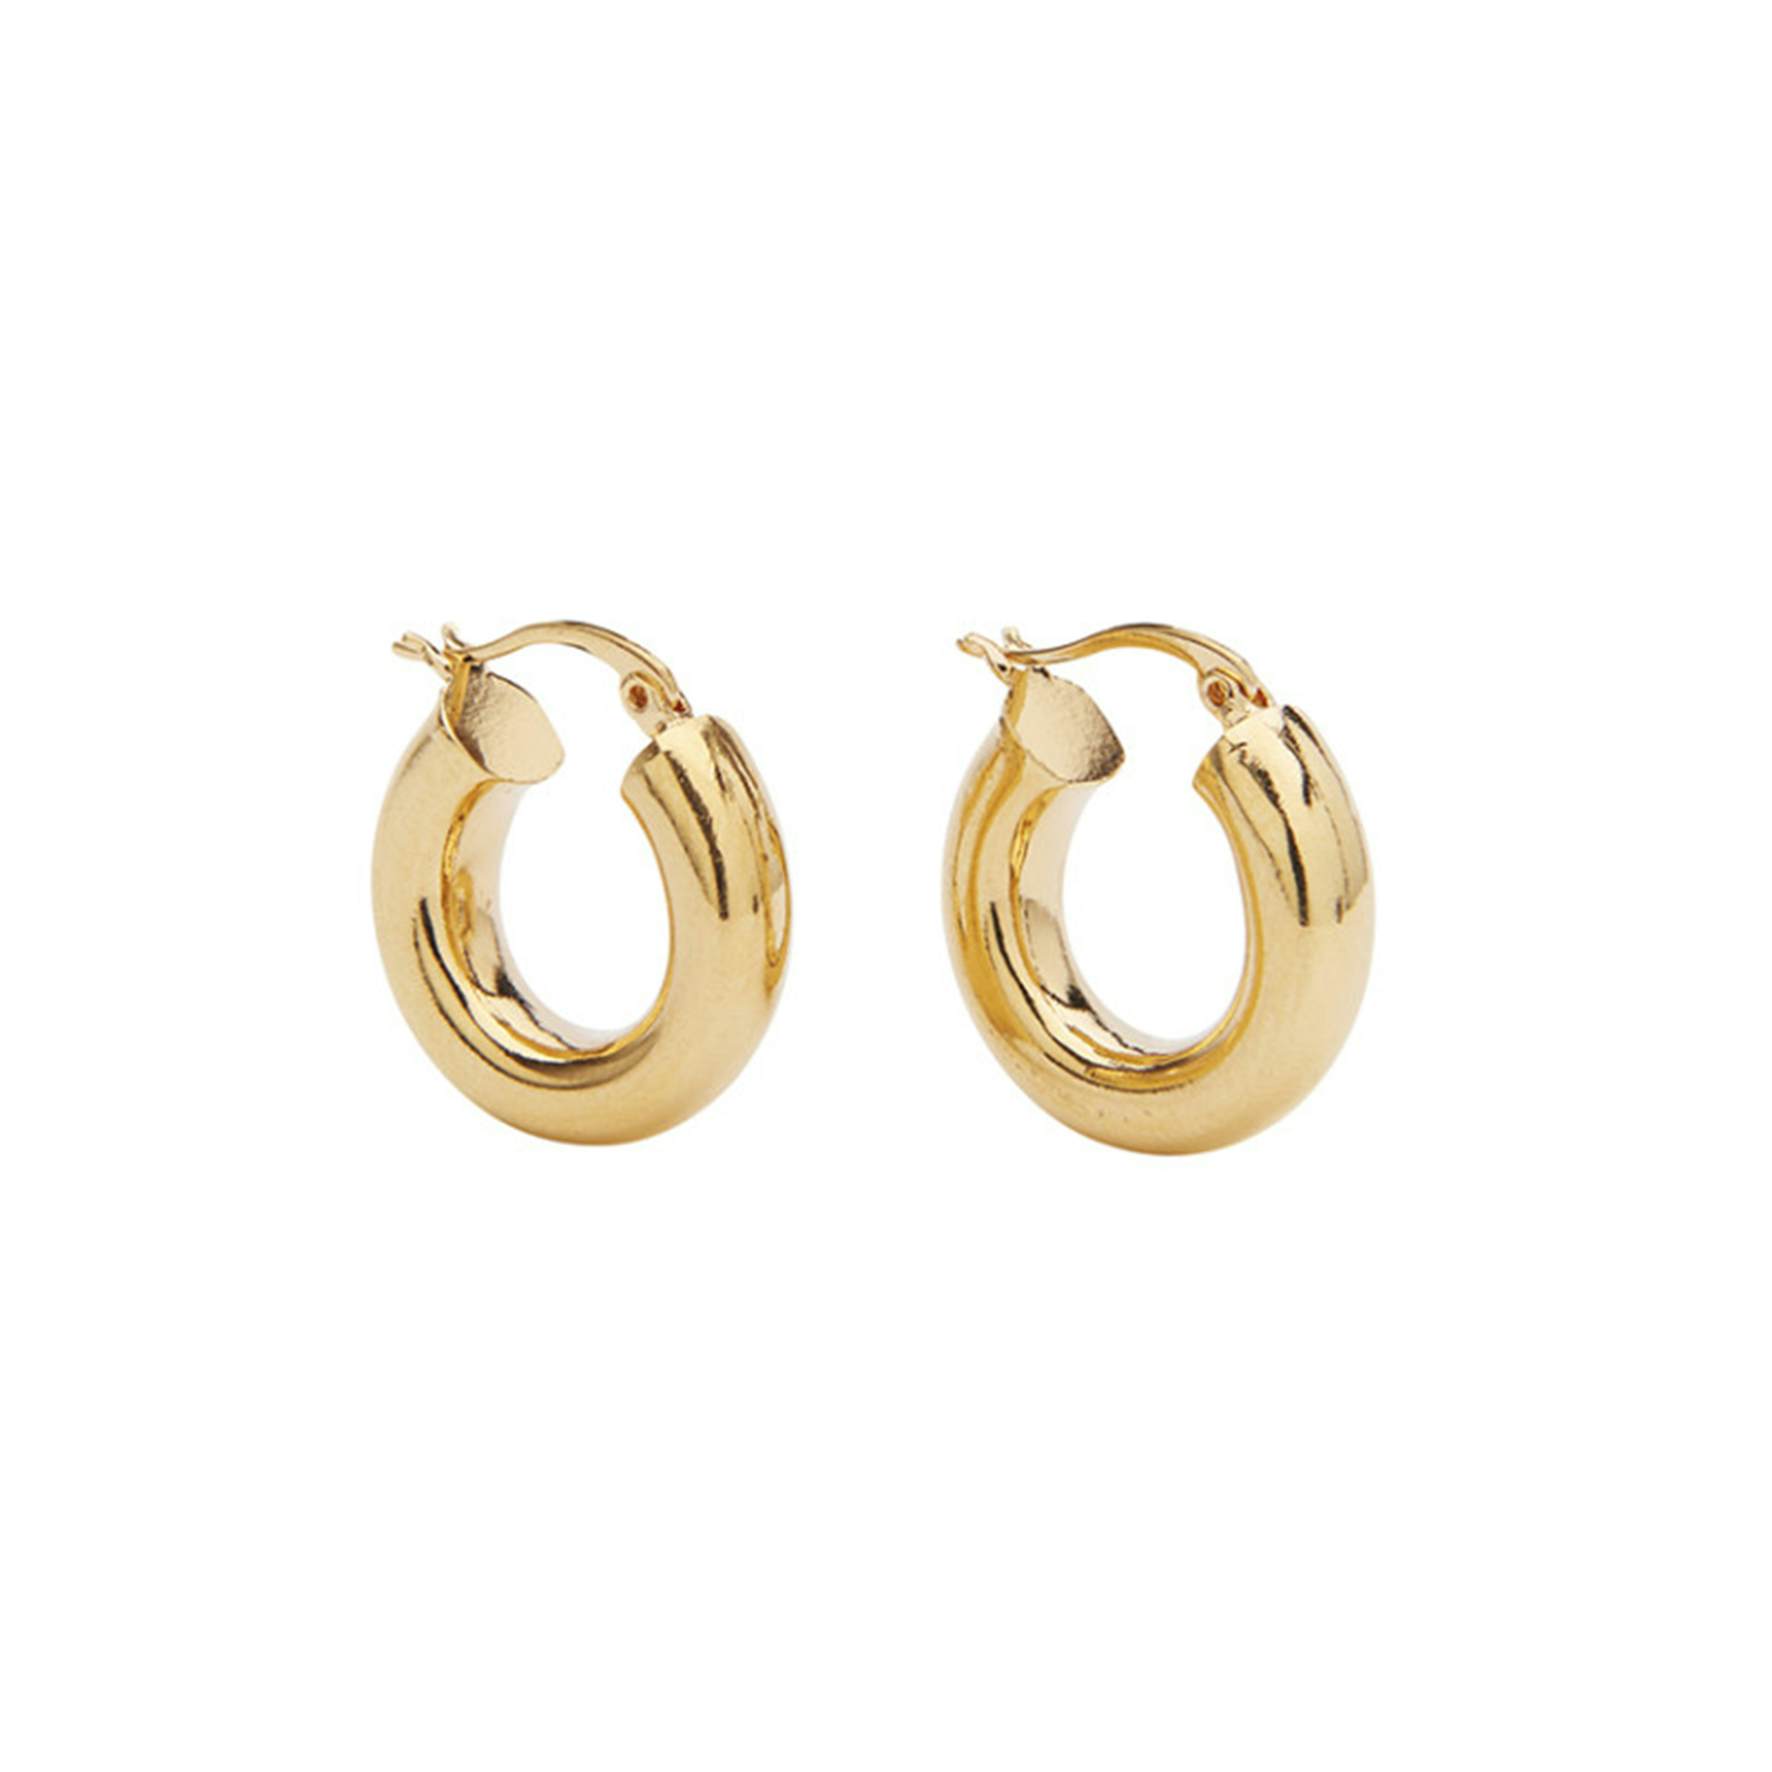 Amanda Chunky Hoops from Pico in Goldplated-Silver Sterling 925